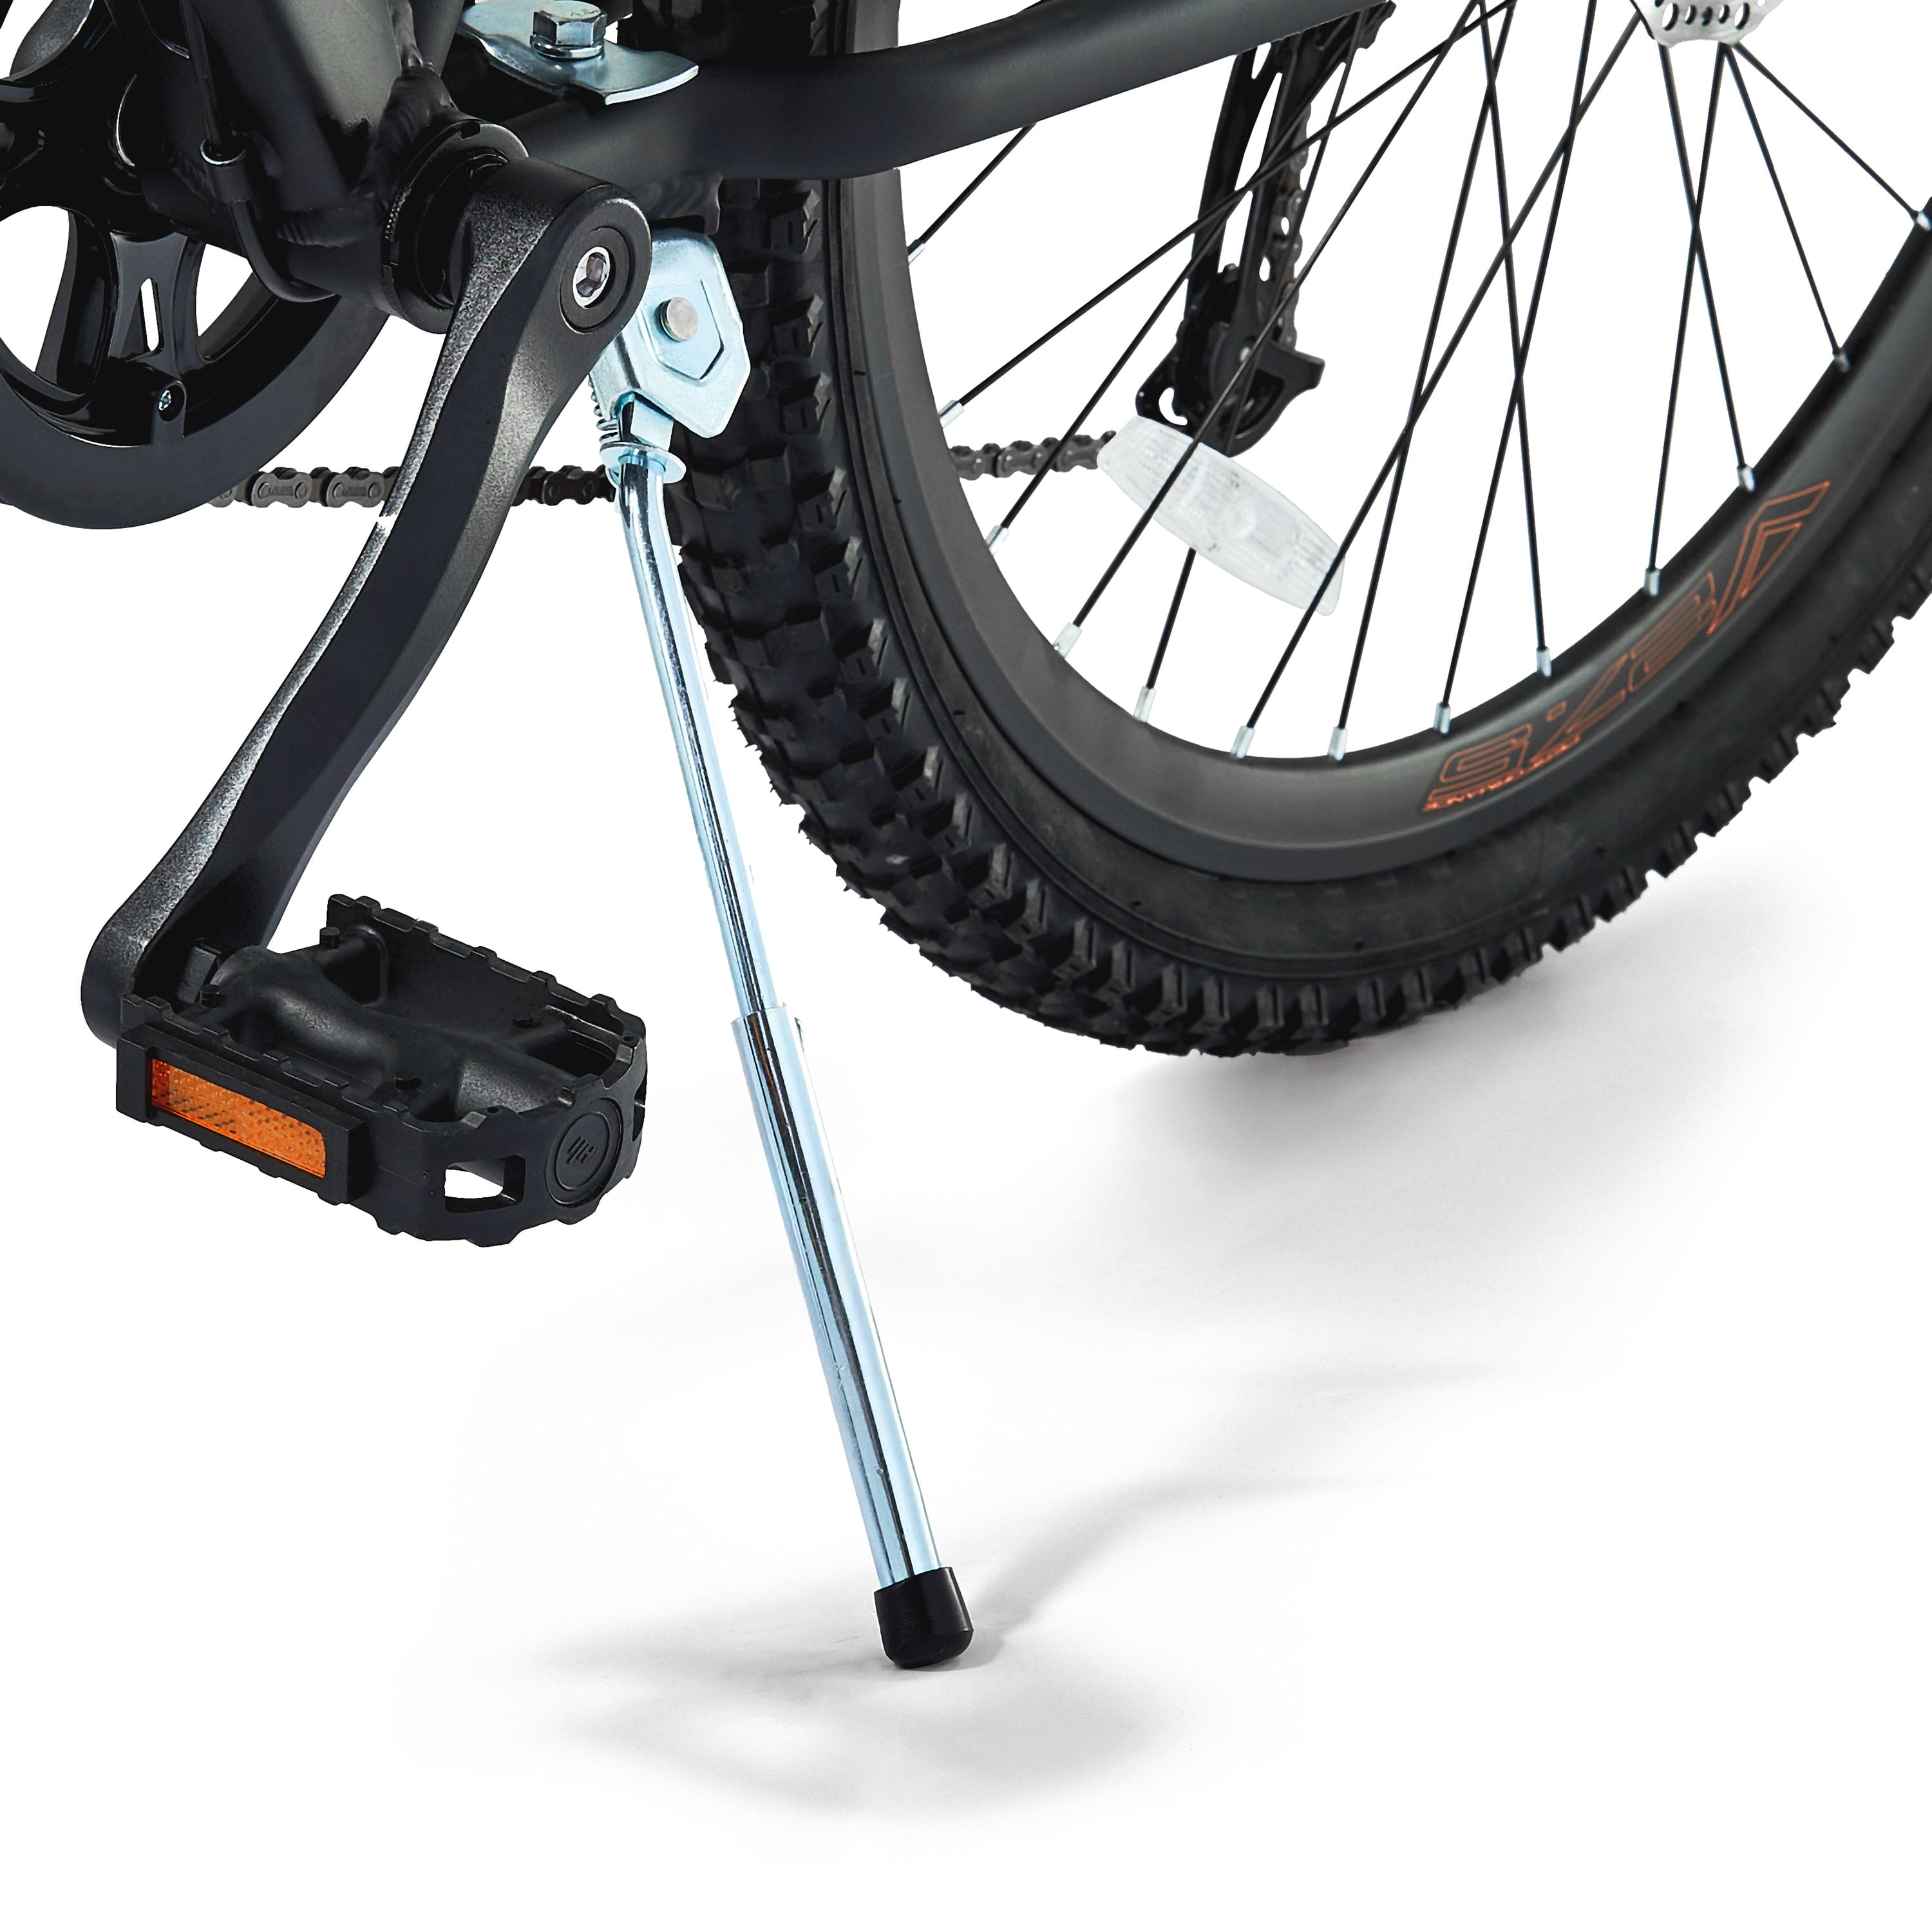 Kick Stand Sturdy Bicycle Components Easy to Install Adjustable